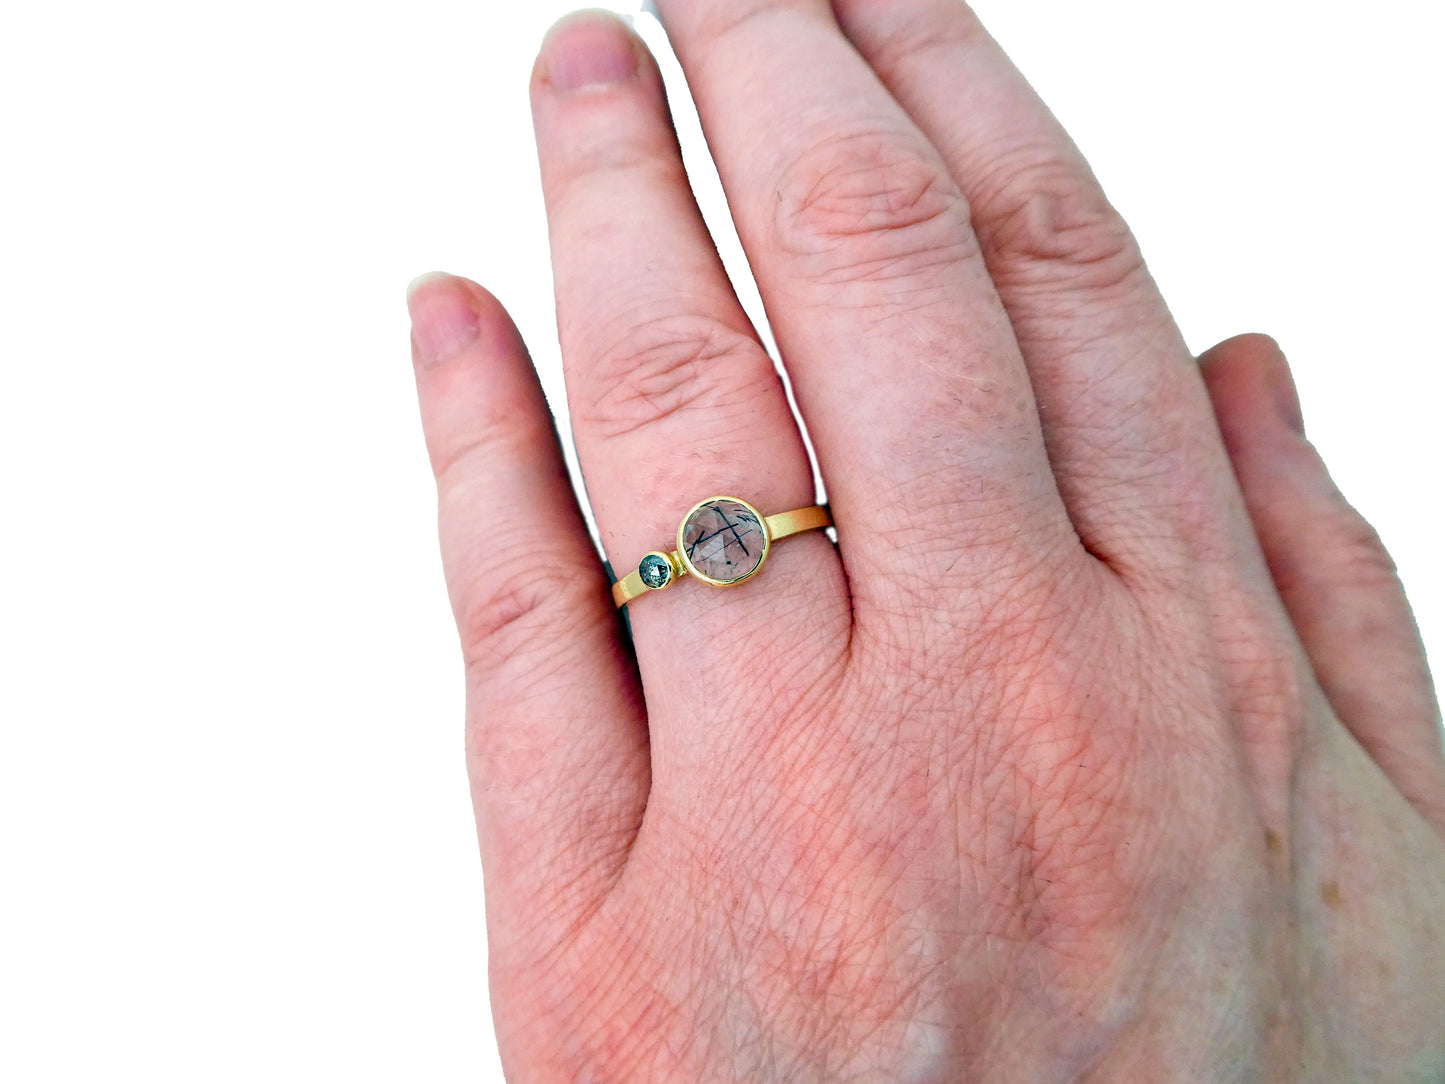 Black Tourmaline in Quartz 14k Yellow Gold Ring, accented with salt and pepper rose cut diamond, size 7